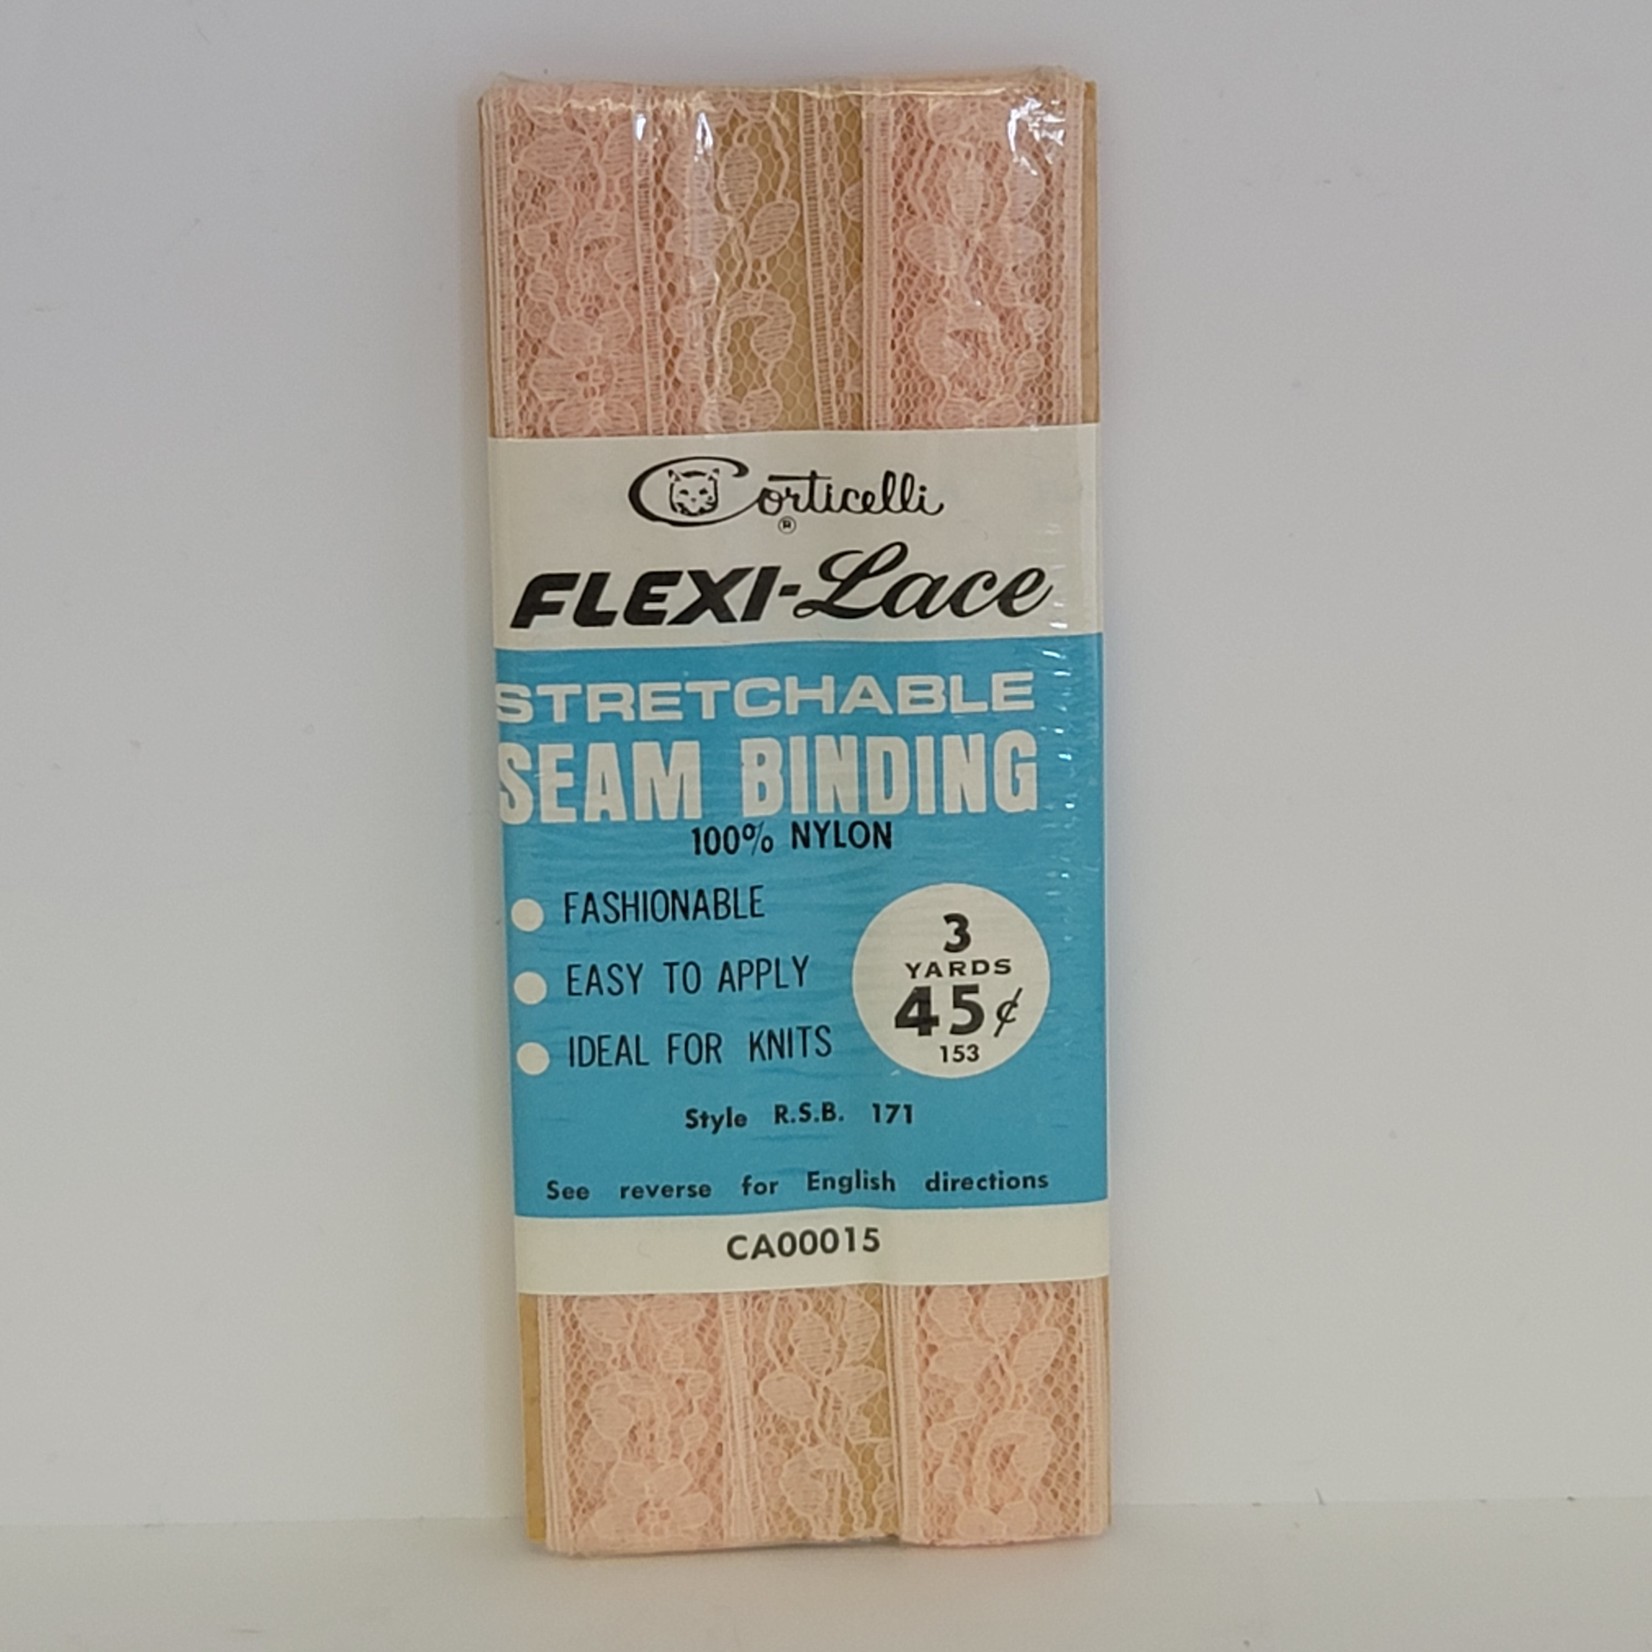 Vintage Flexi-Lace -  Stretchable Seam Binding and Hem Facing